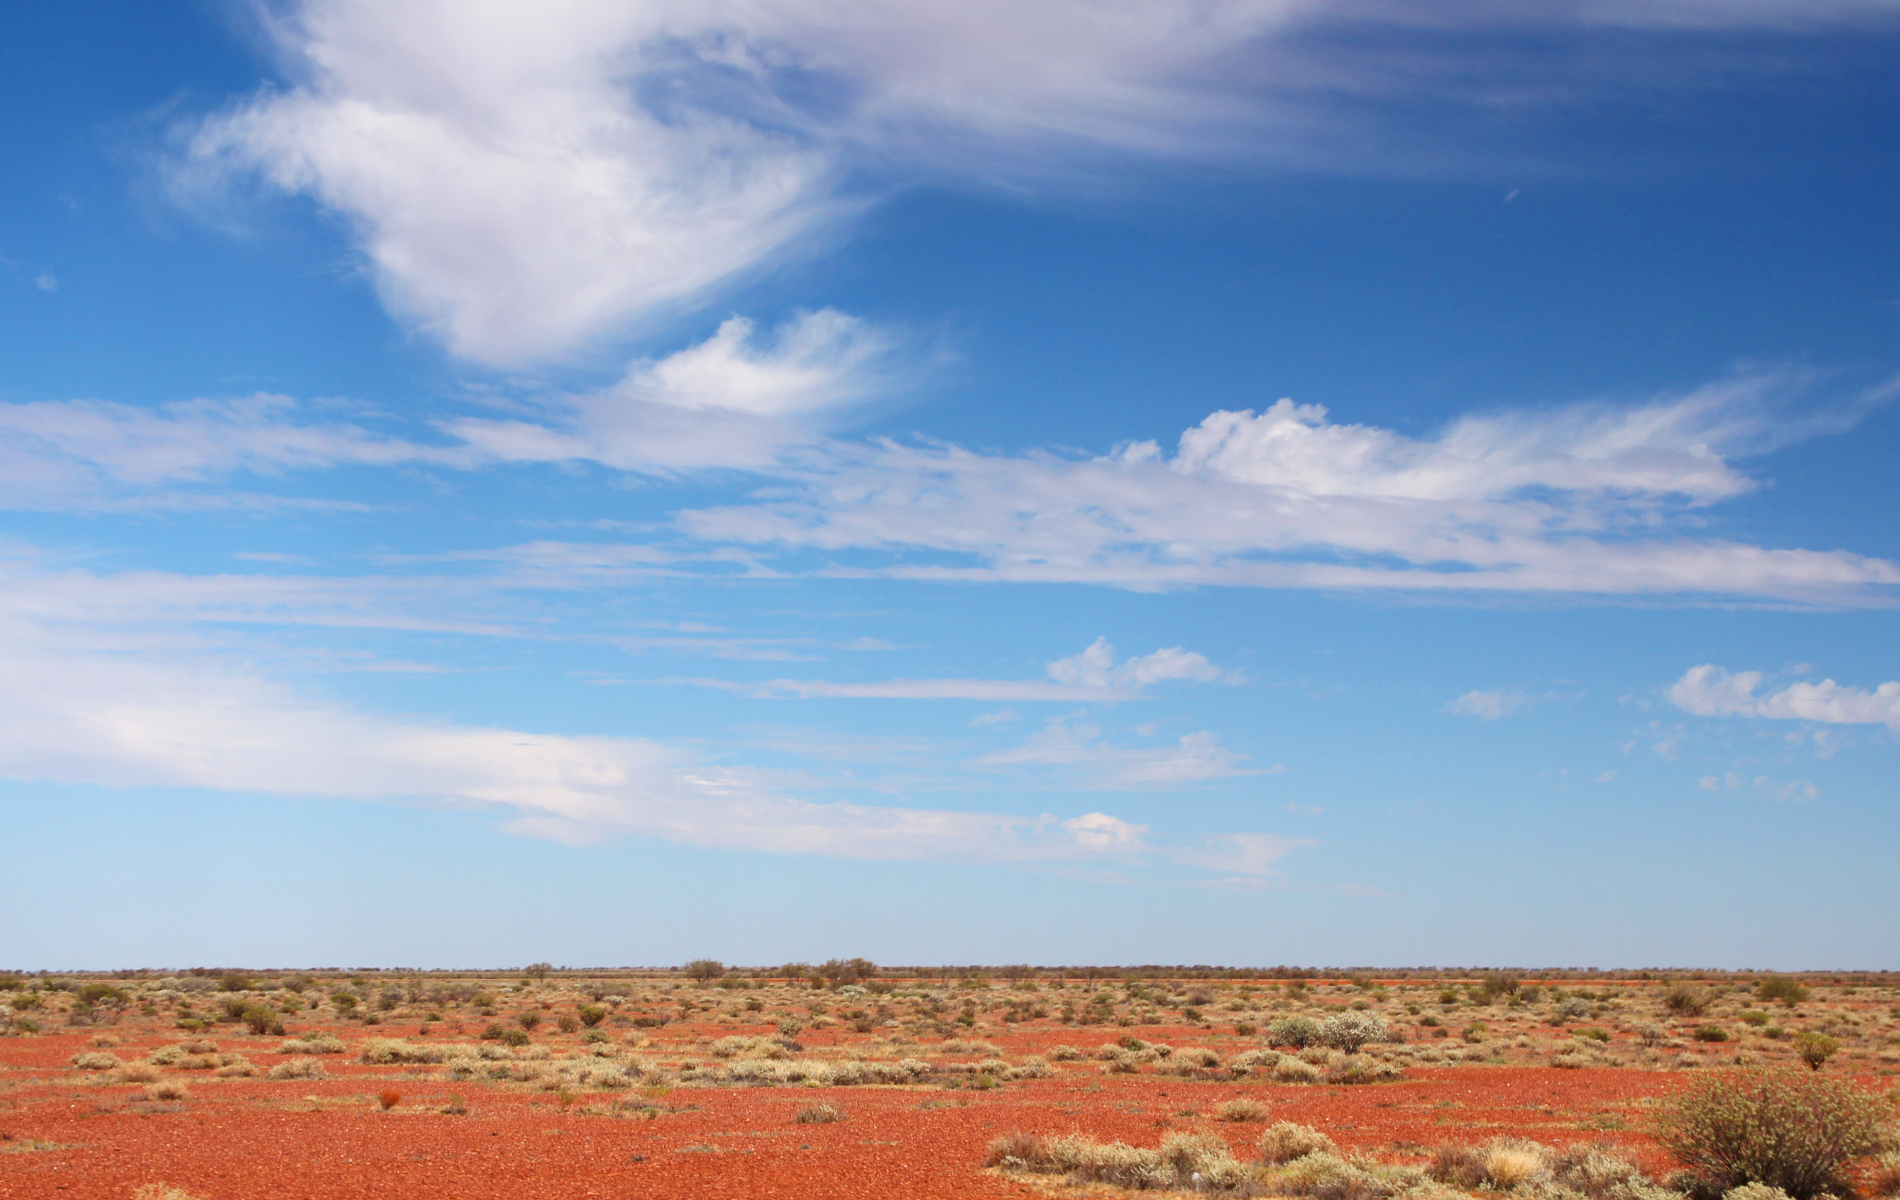 Image of Australian outback and blue sky